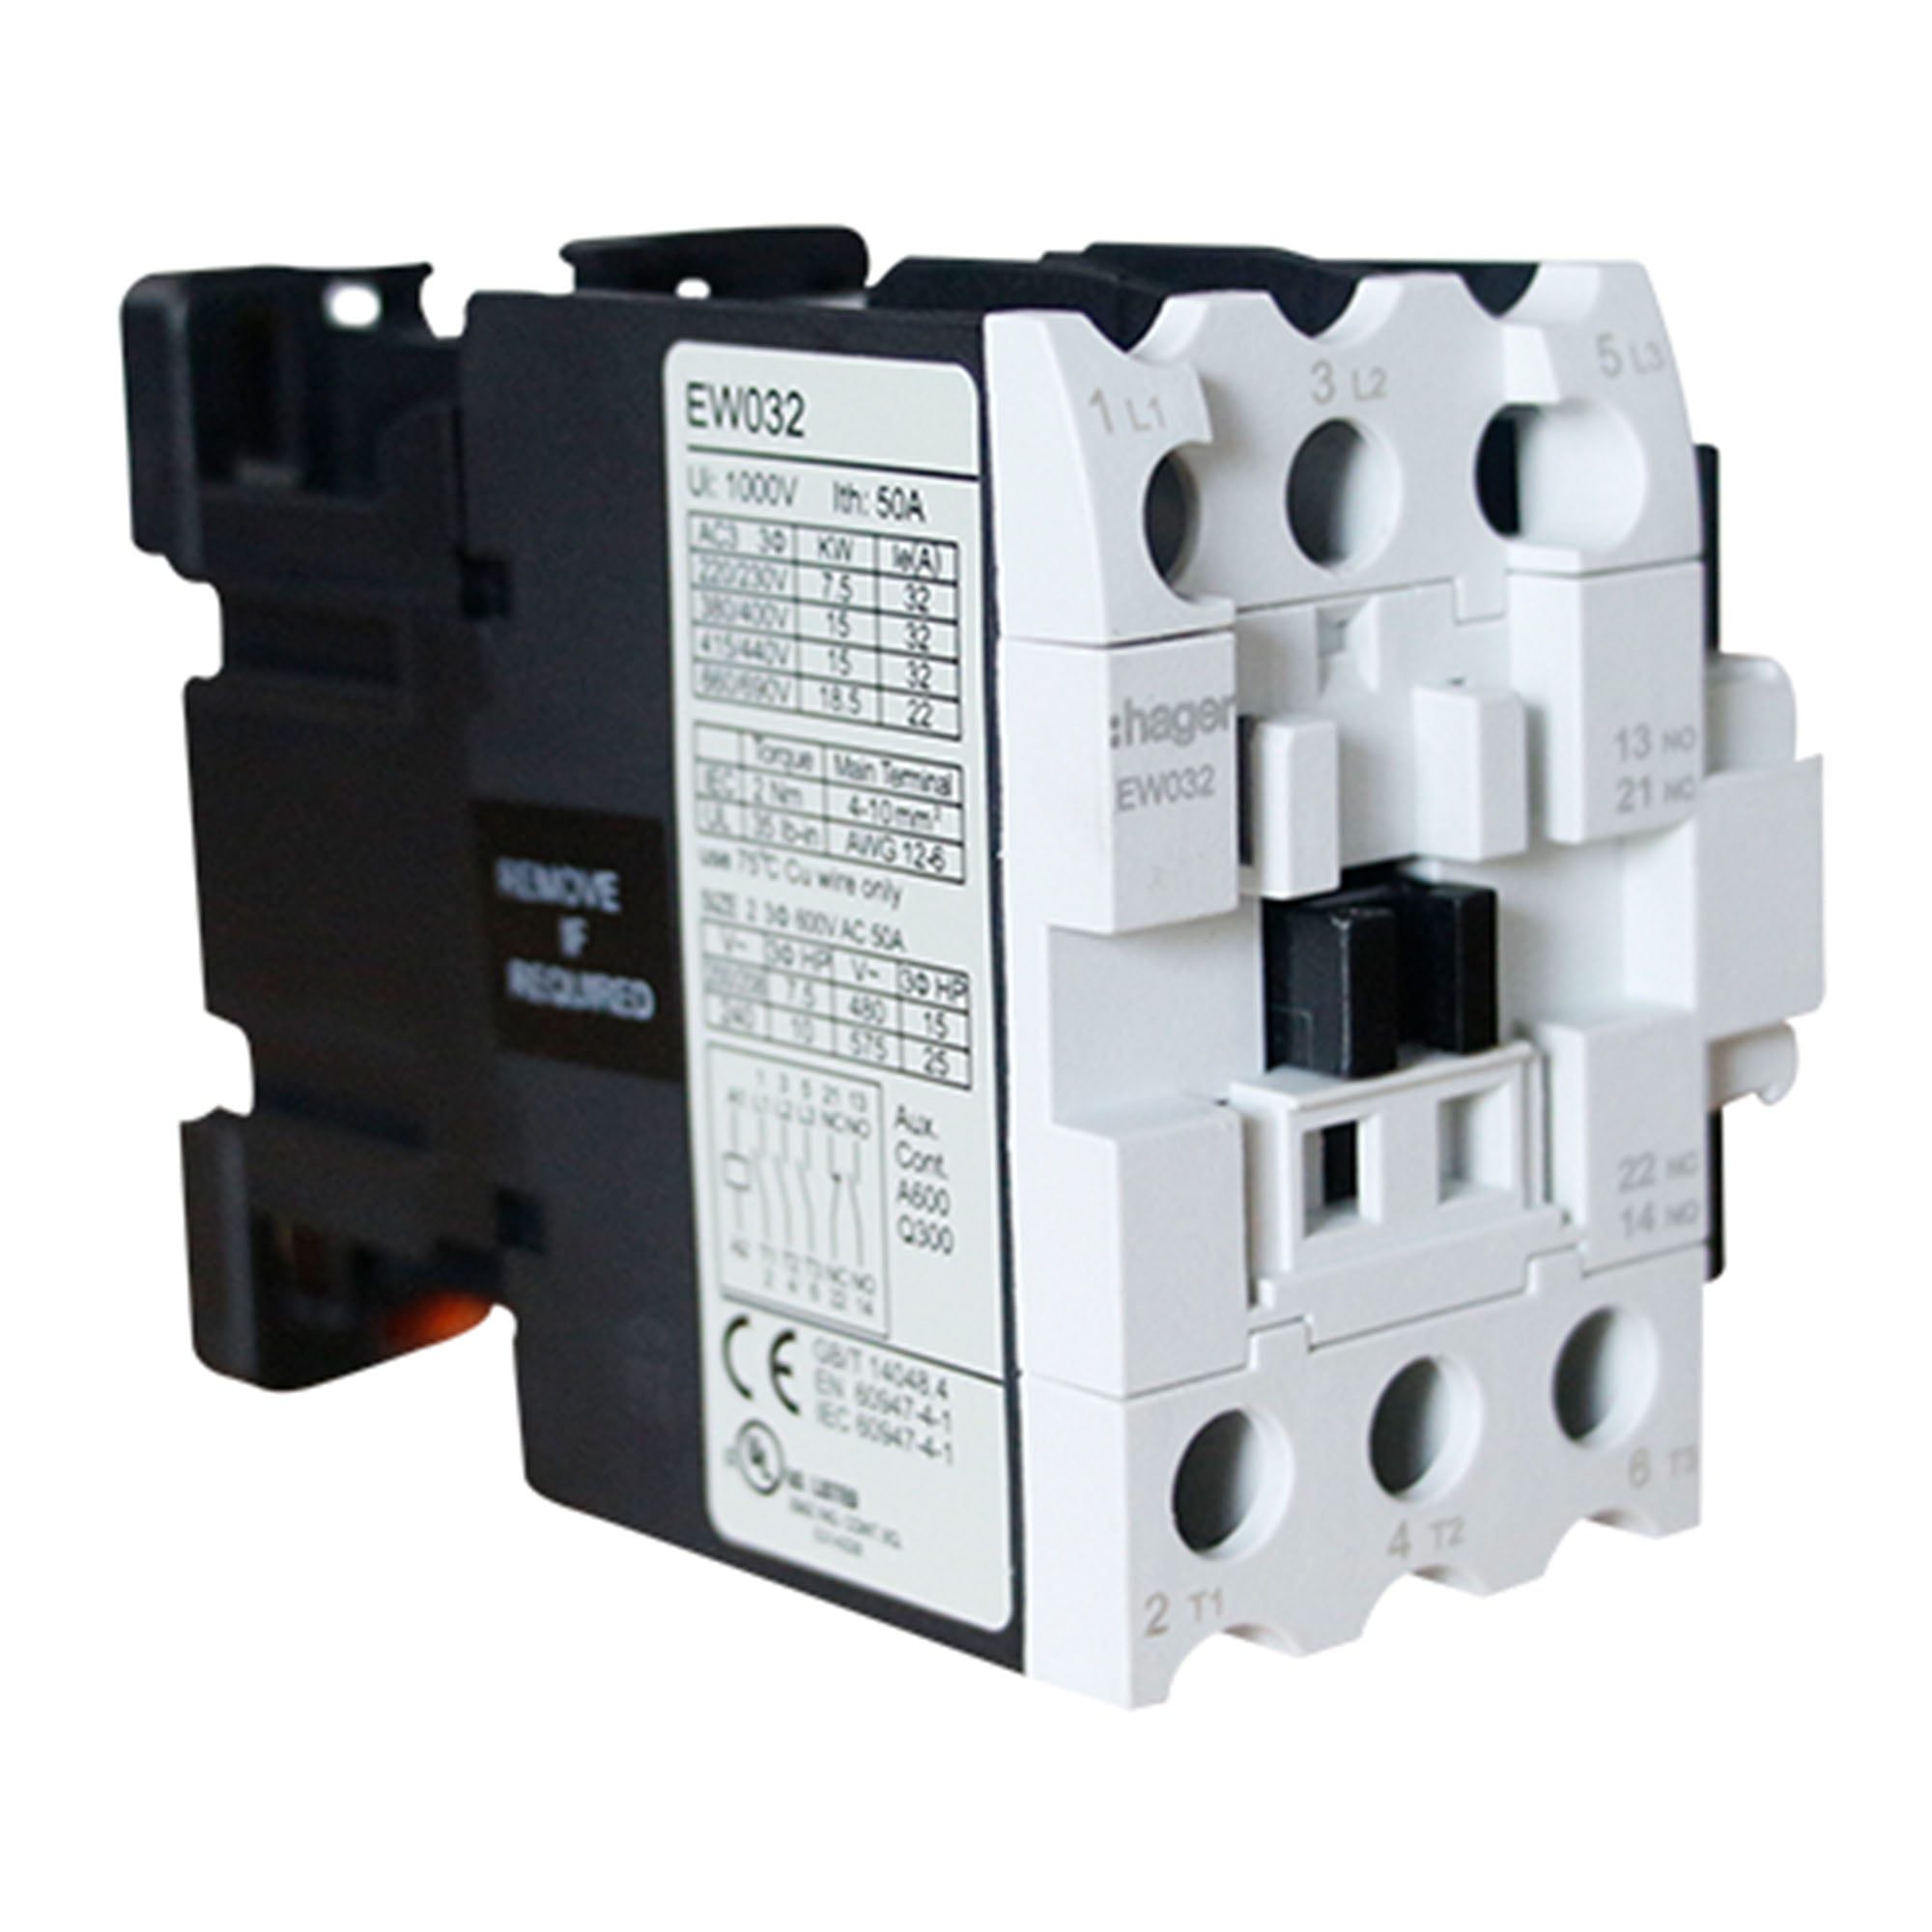 TOMA EMPOTRABLE 32AMP 3P+T 250V AZUL 9H IP44